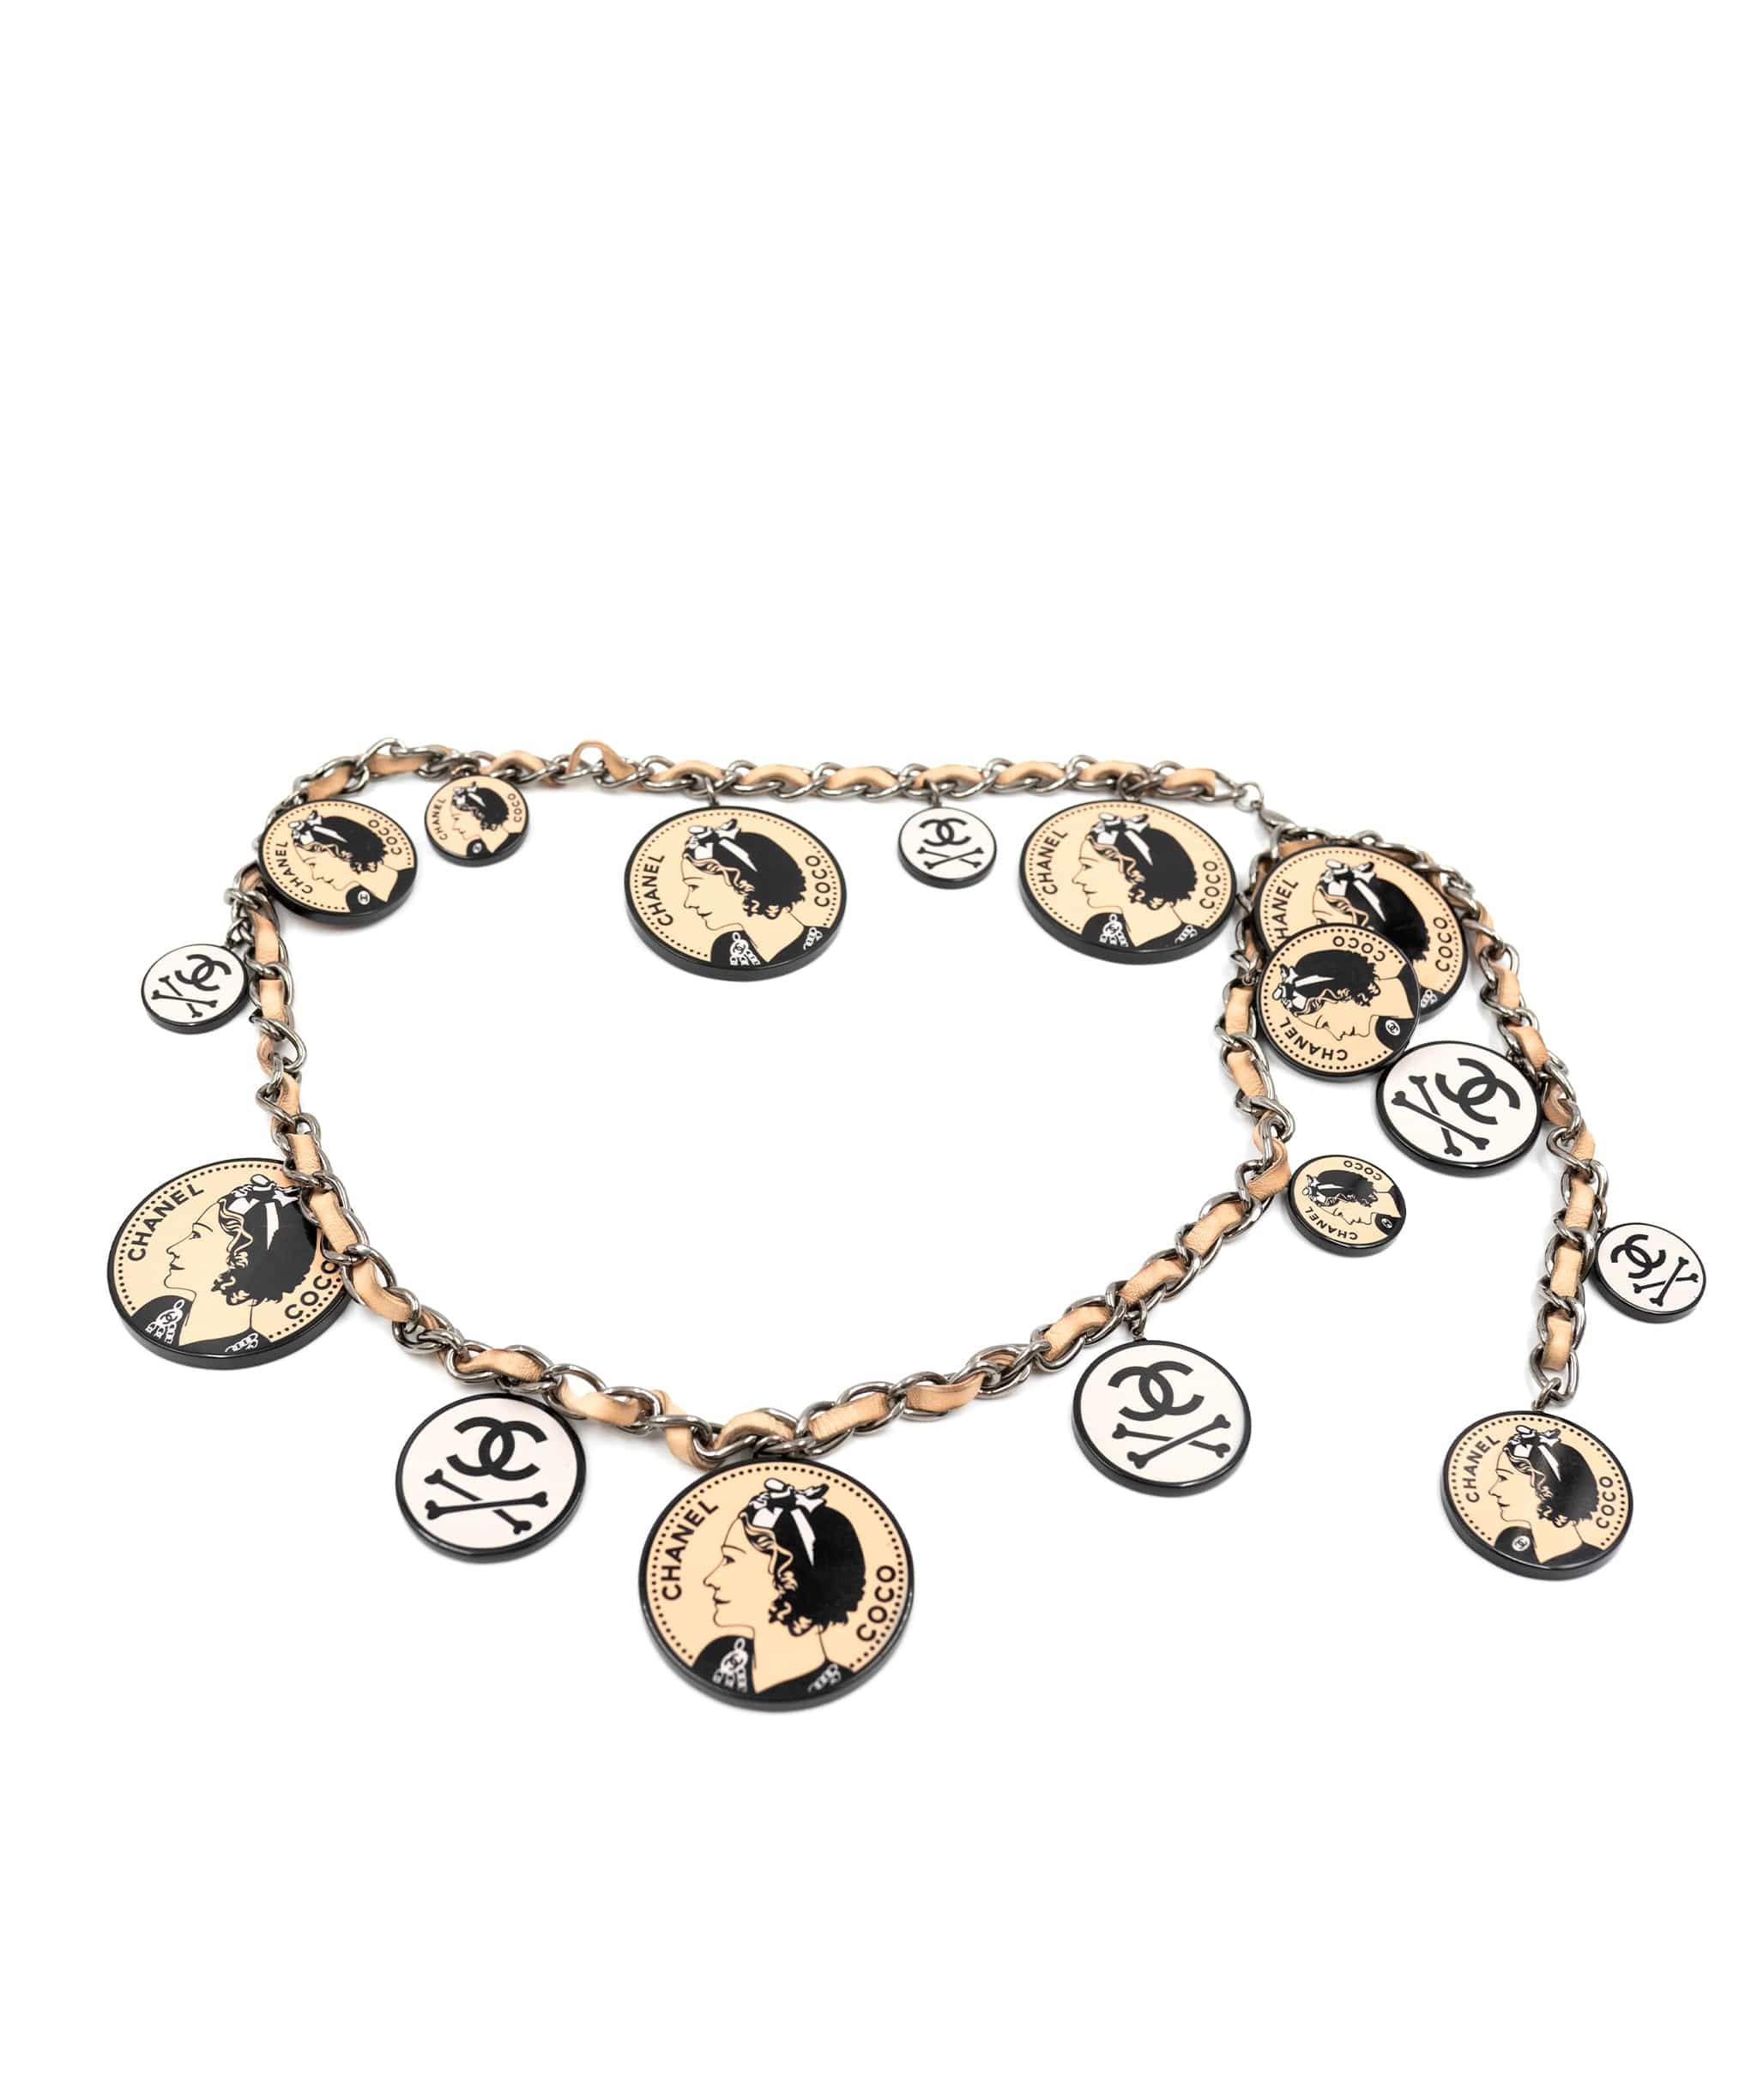 Chanel Chanel long coco necklace ASL3986